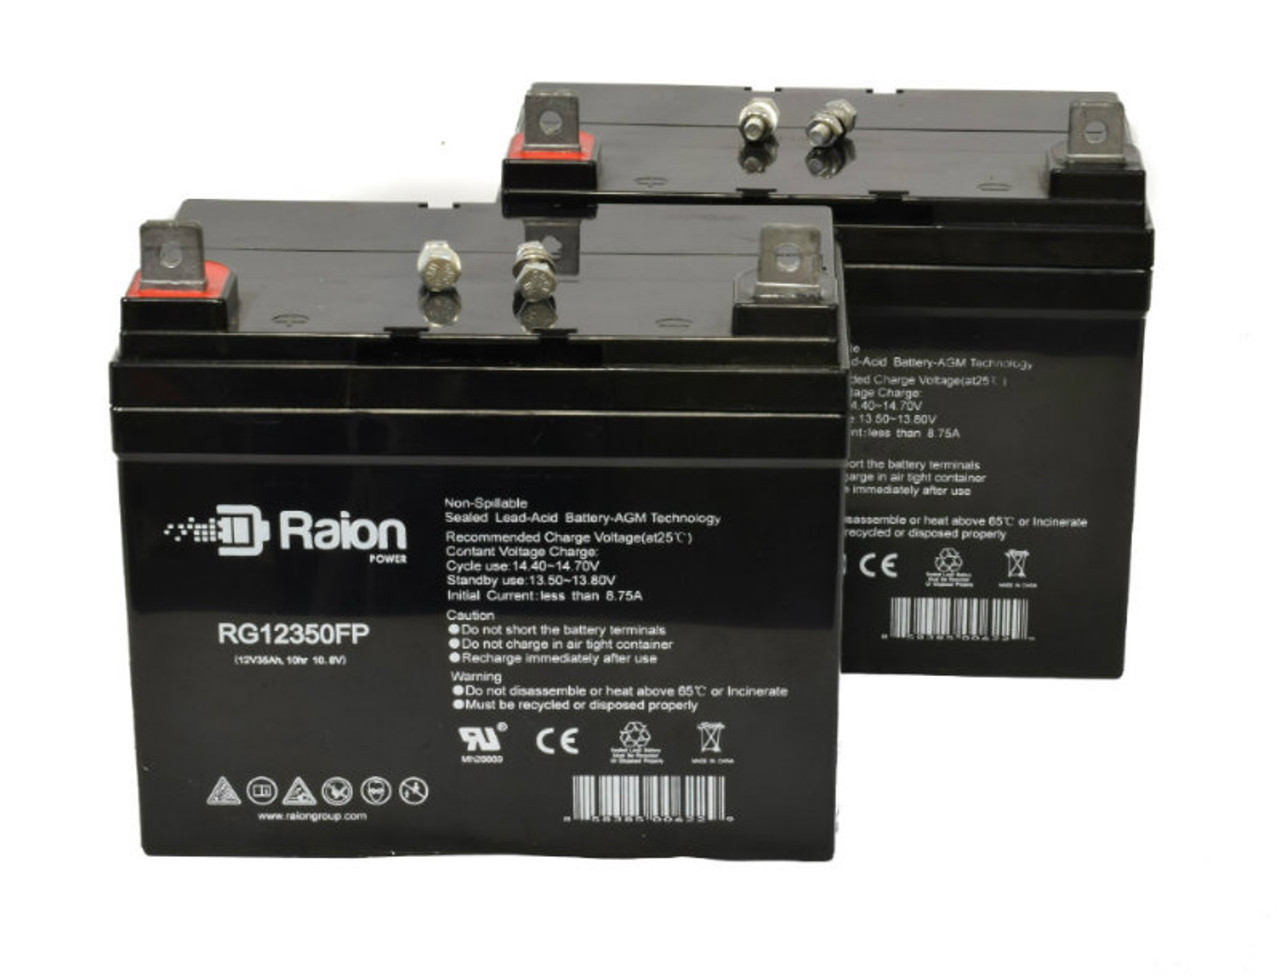 Raion Power Replacement 12V 35Ah Lawn Mower Battery for Excel 261 - 2 Pack